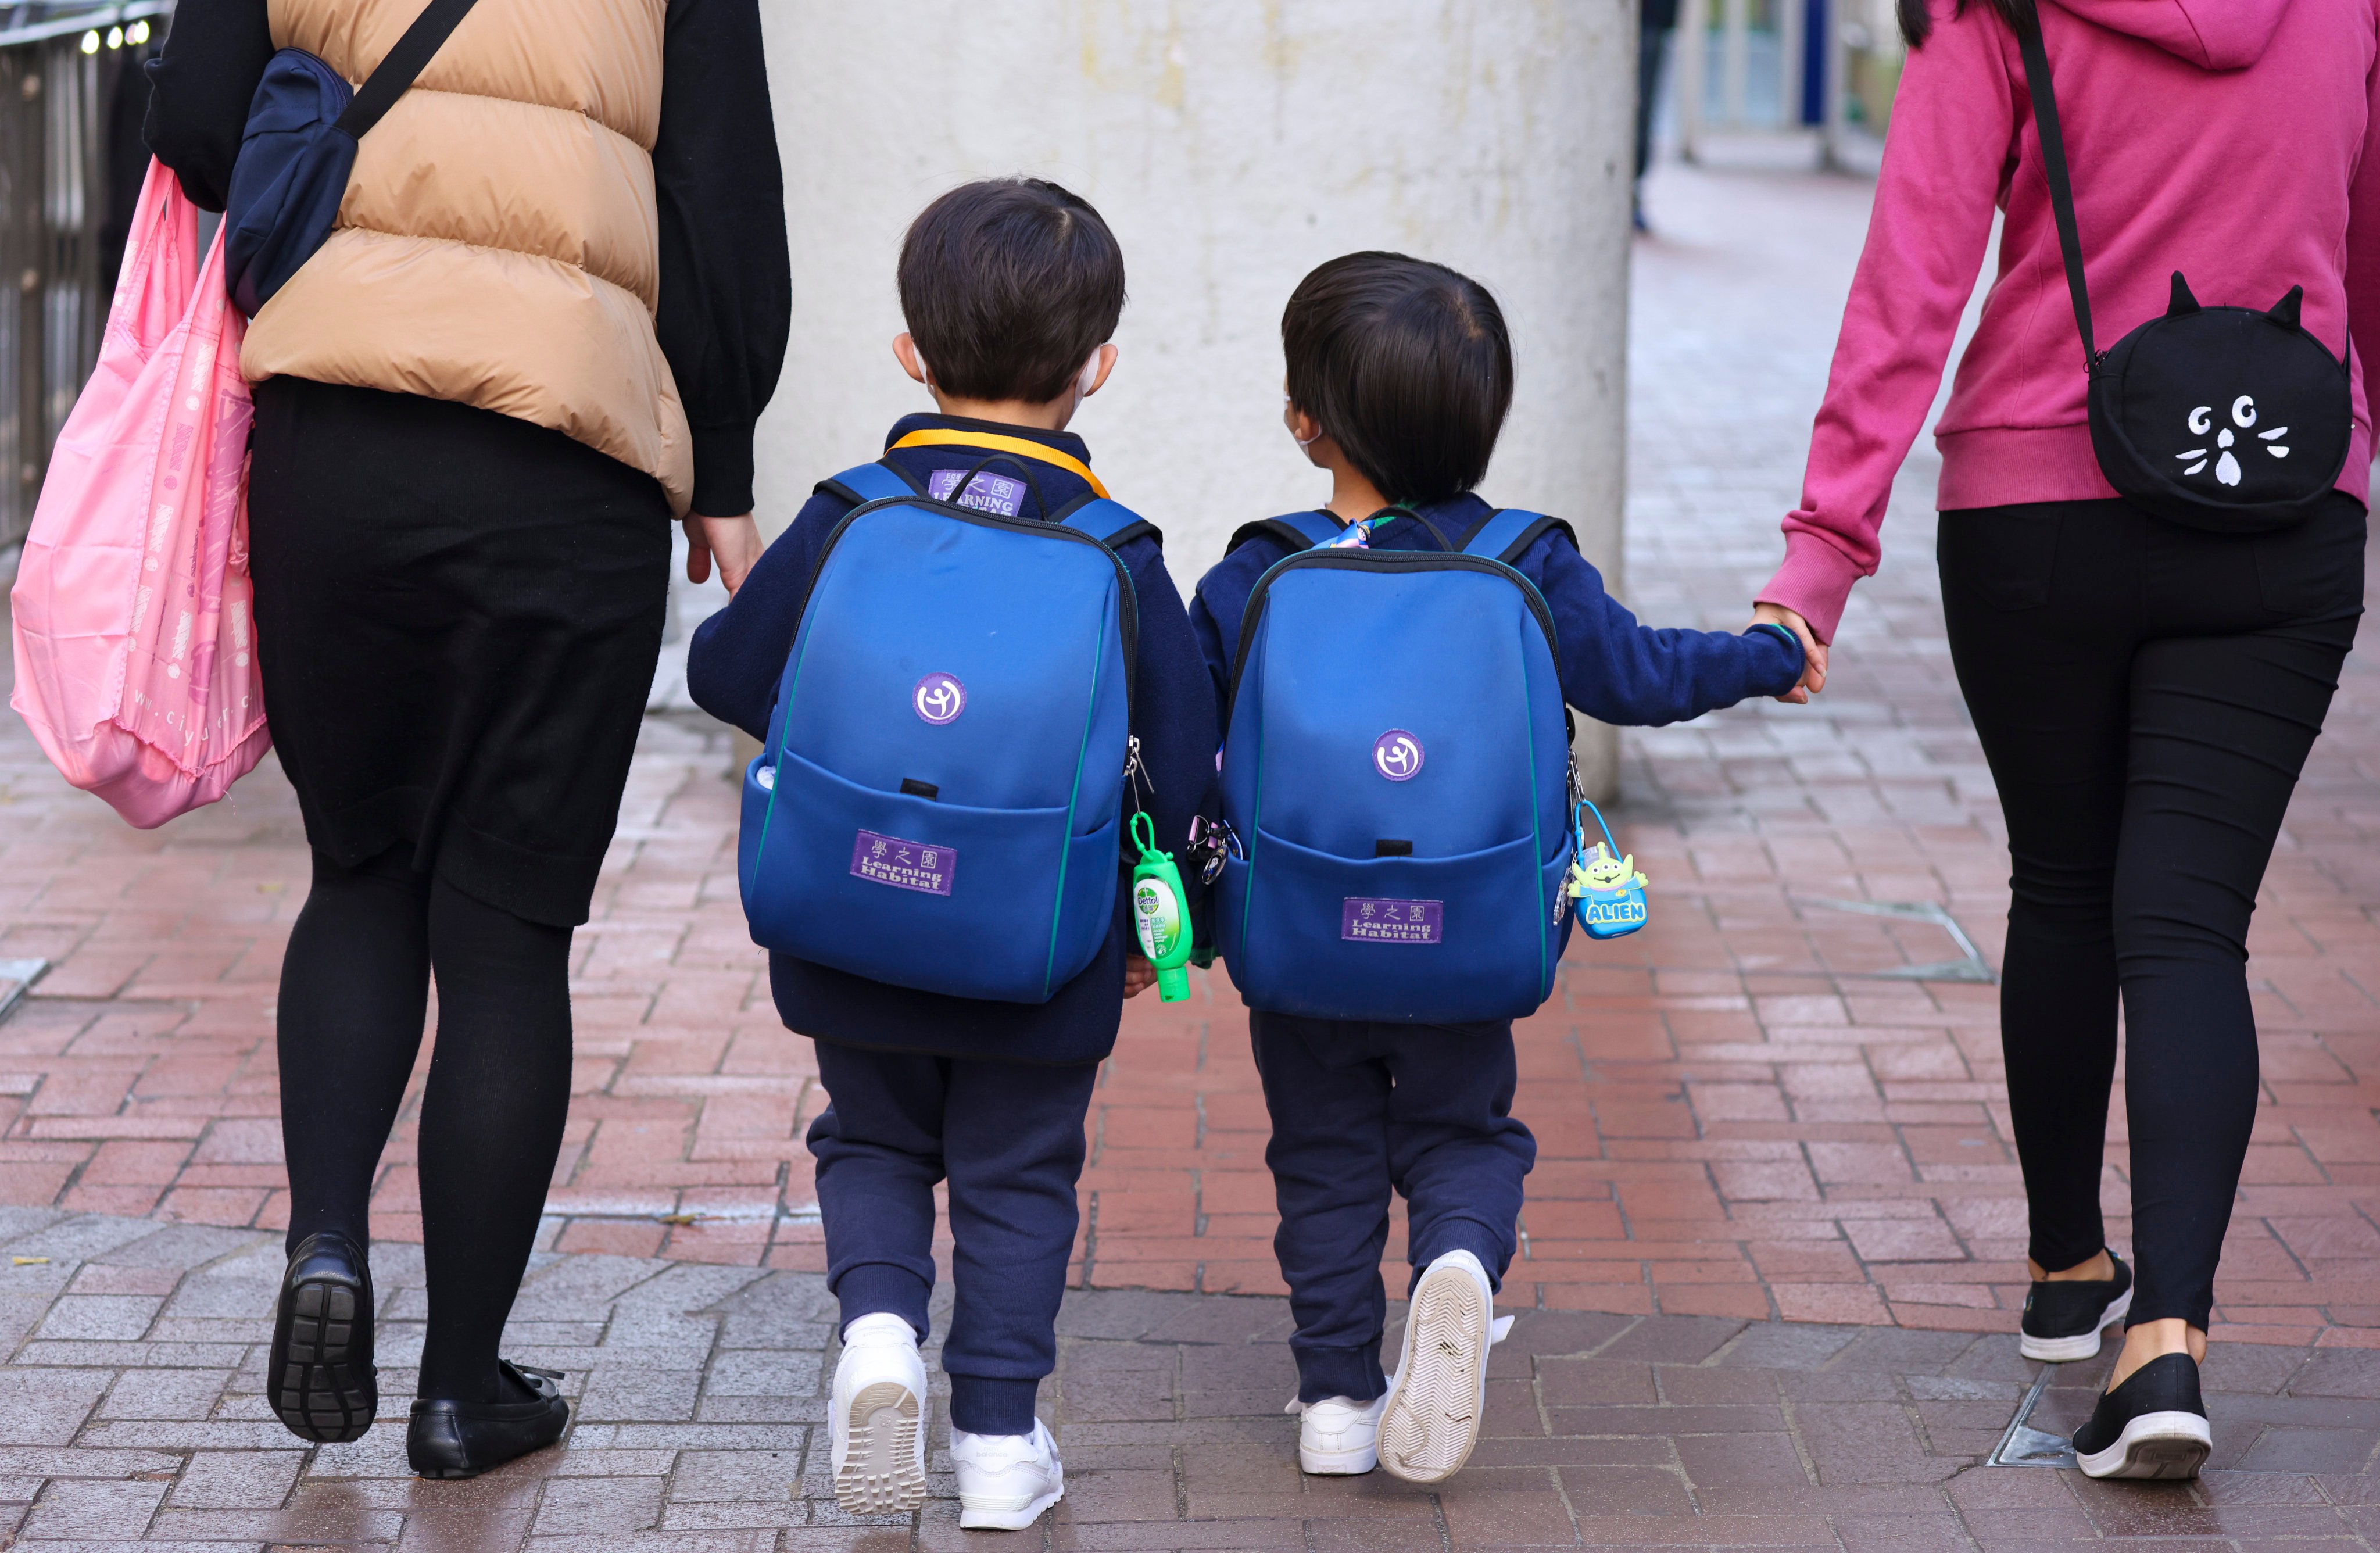 Children leave school in Quarry Bay on January 11, 2022. Some very young pupils have not known anything but face masks, Covid-19 tests, short school days and constant messaging about the dreaded virus. Photo: Nora Tam